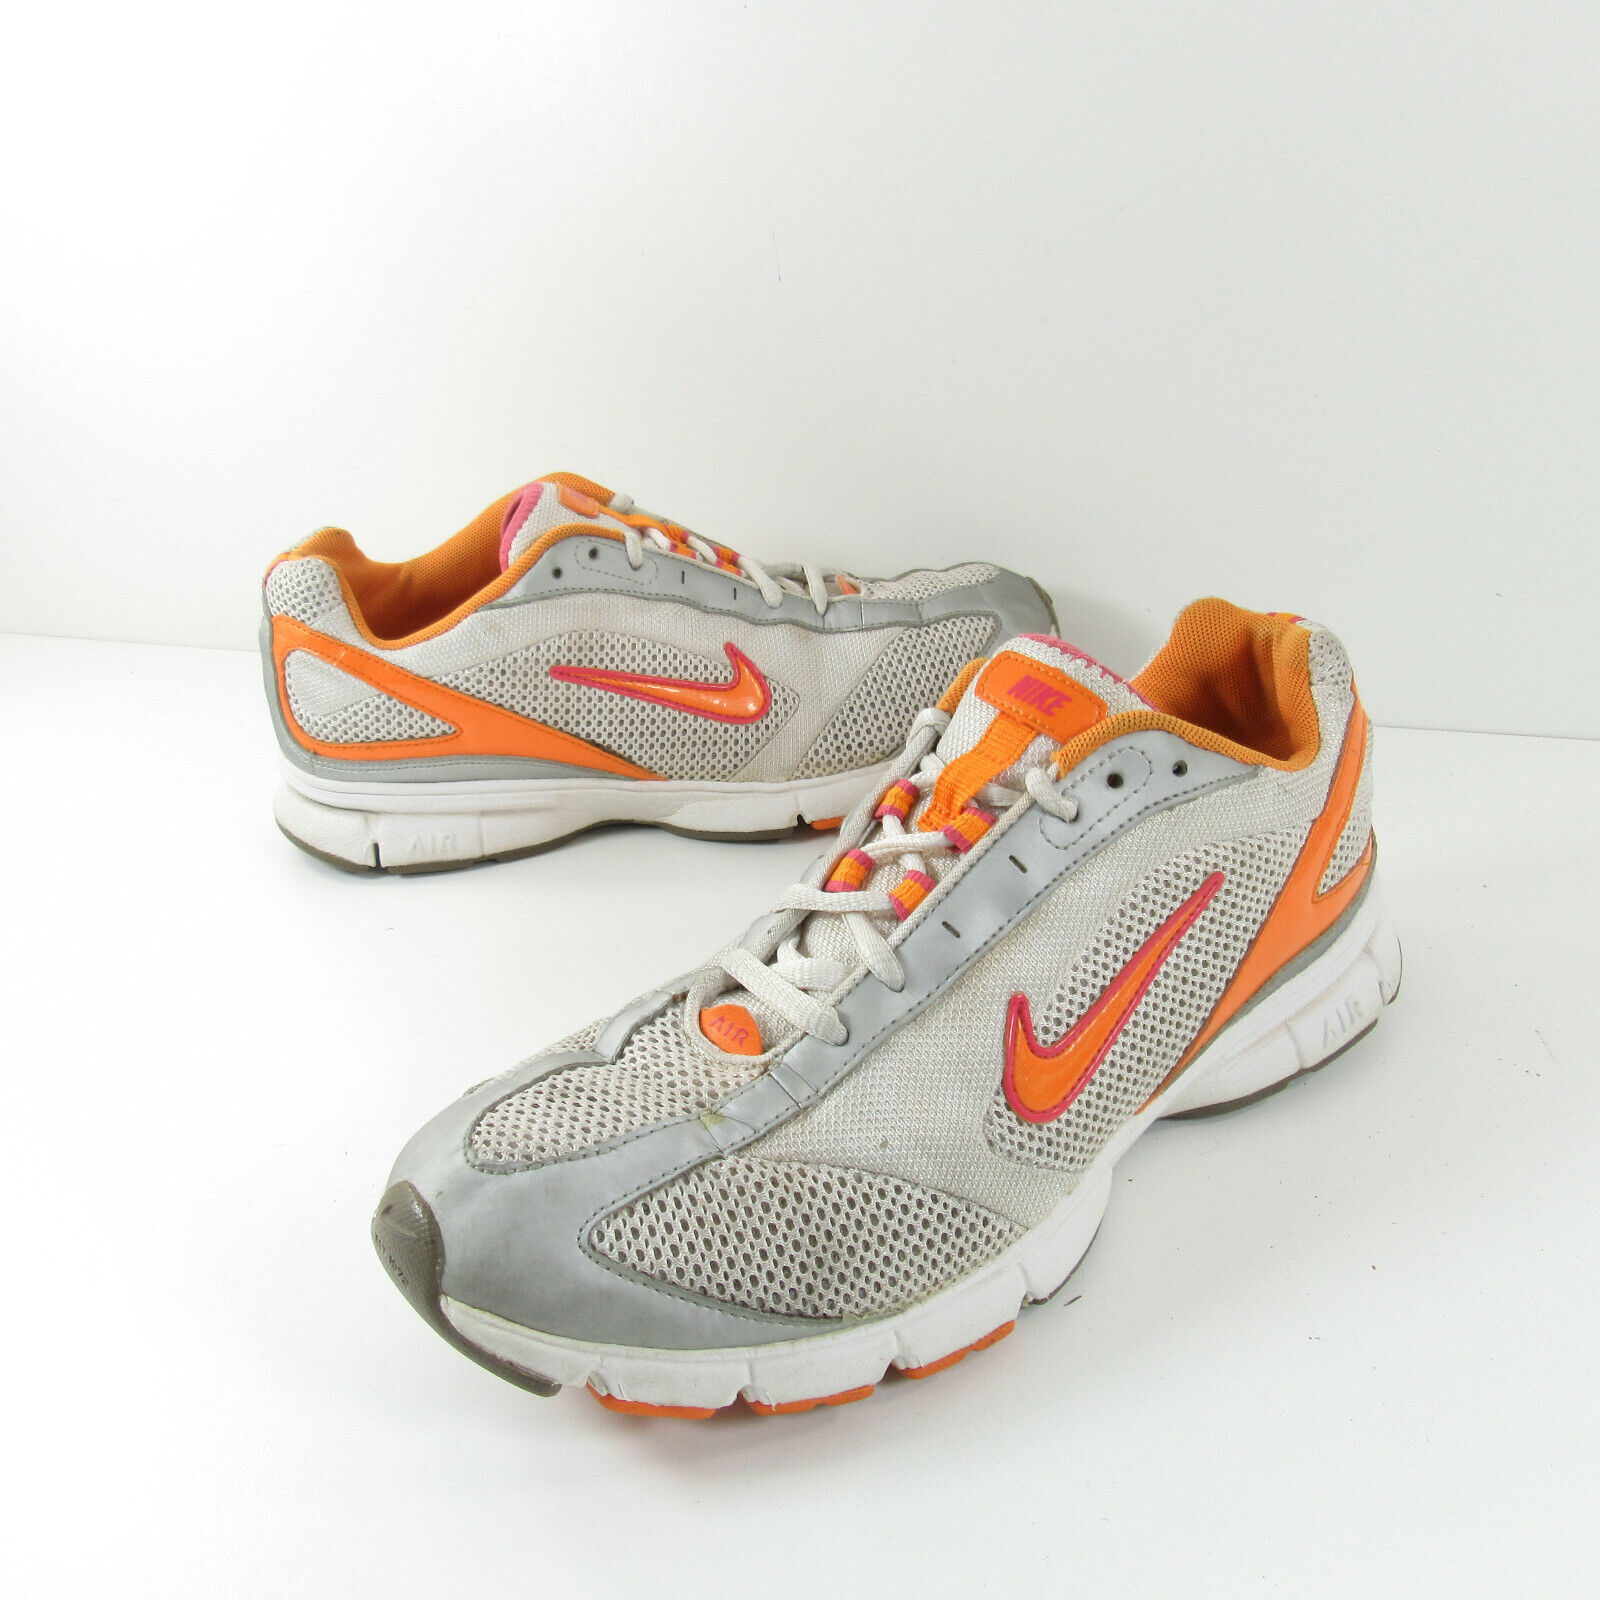 Primary image for Nike Air Track Star 3 Womens Size 8.5 White Orange Pink Running Shoes 318679-181